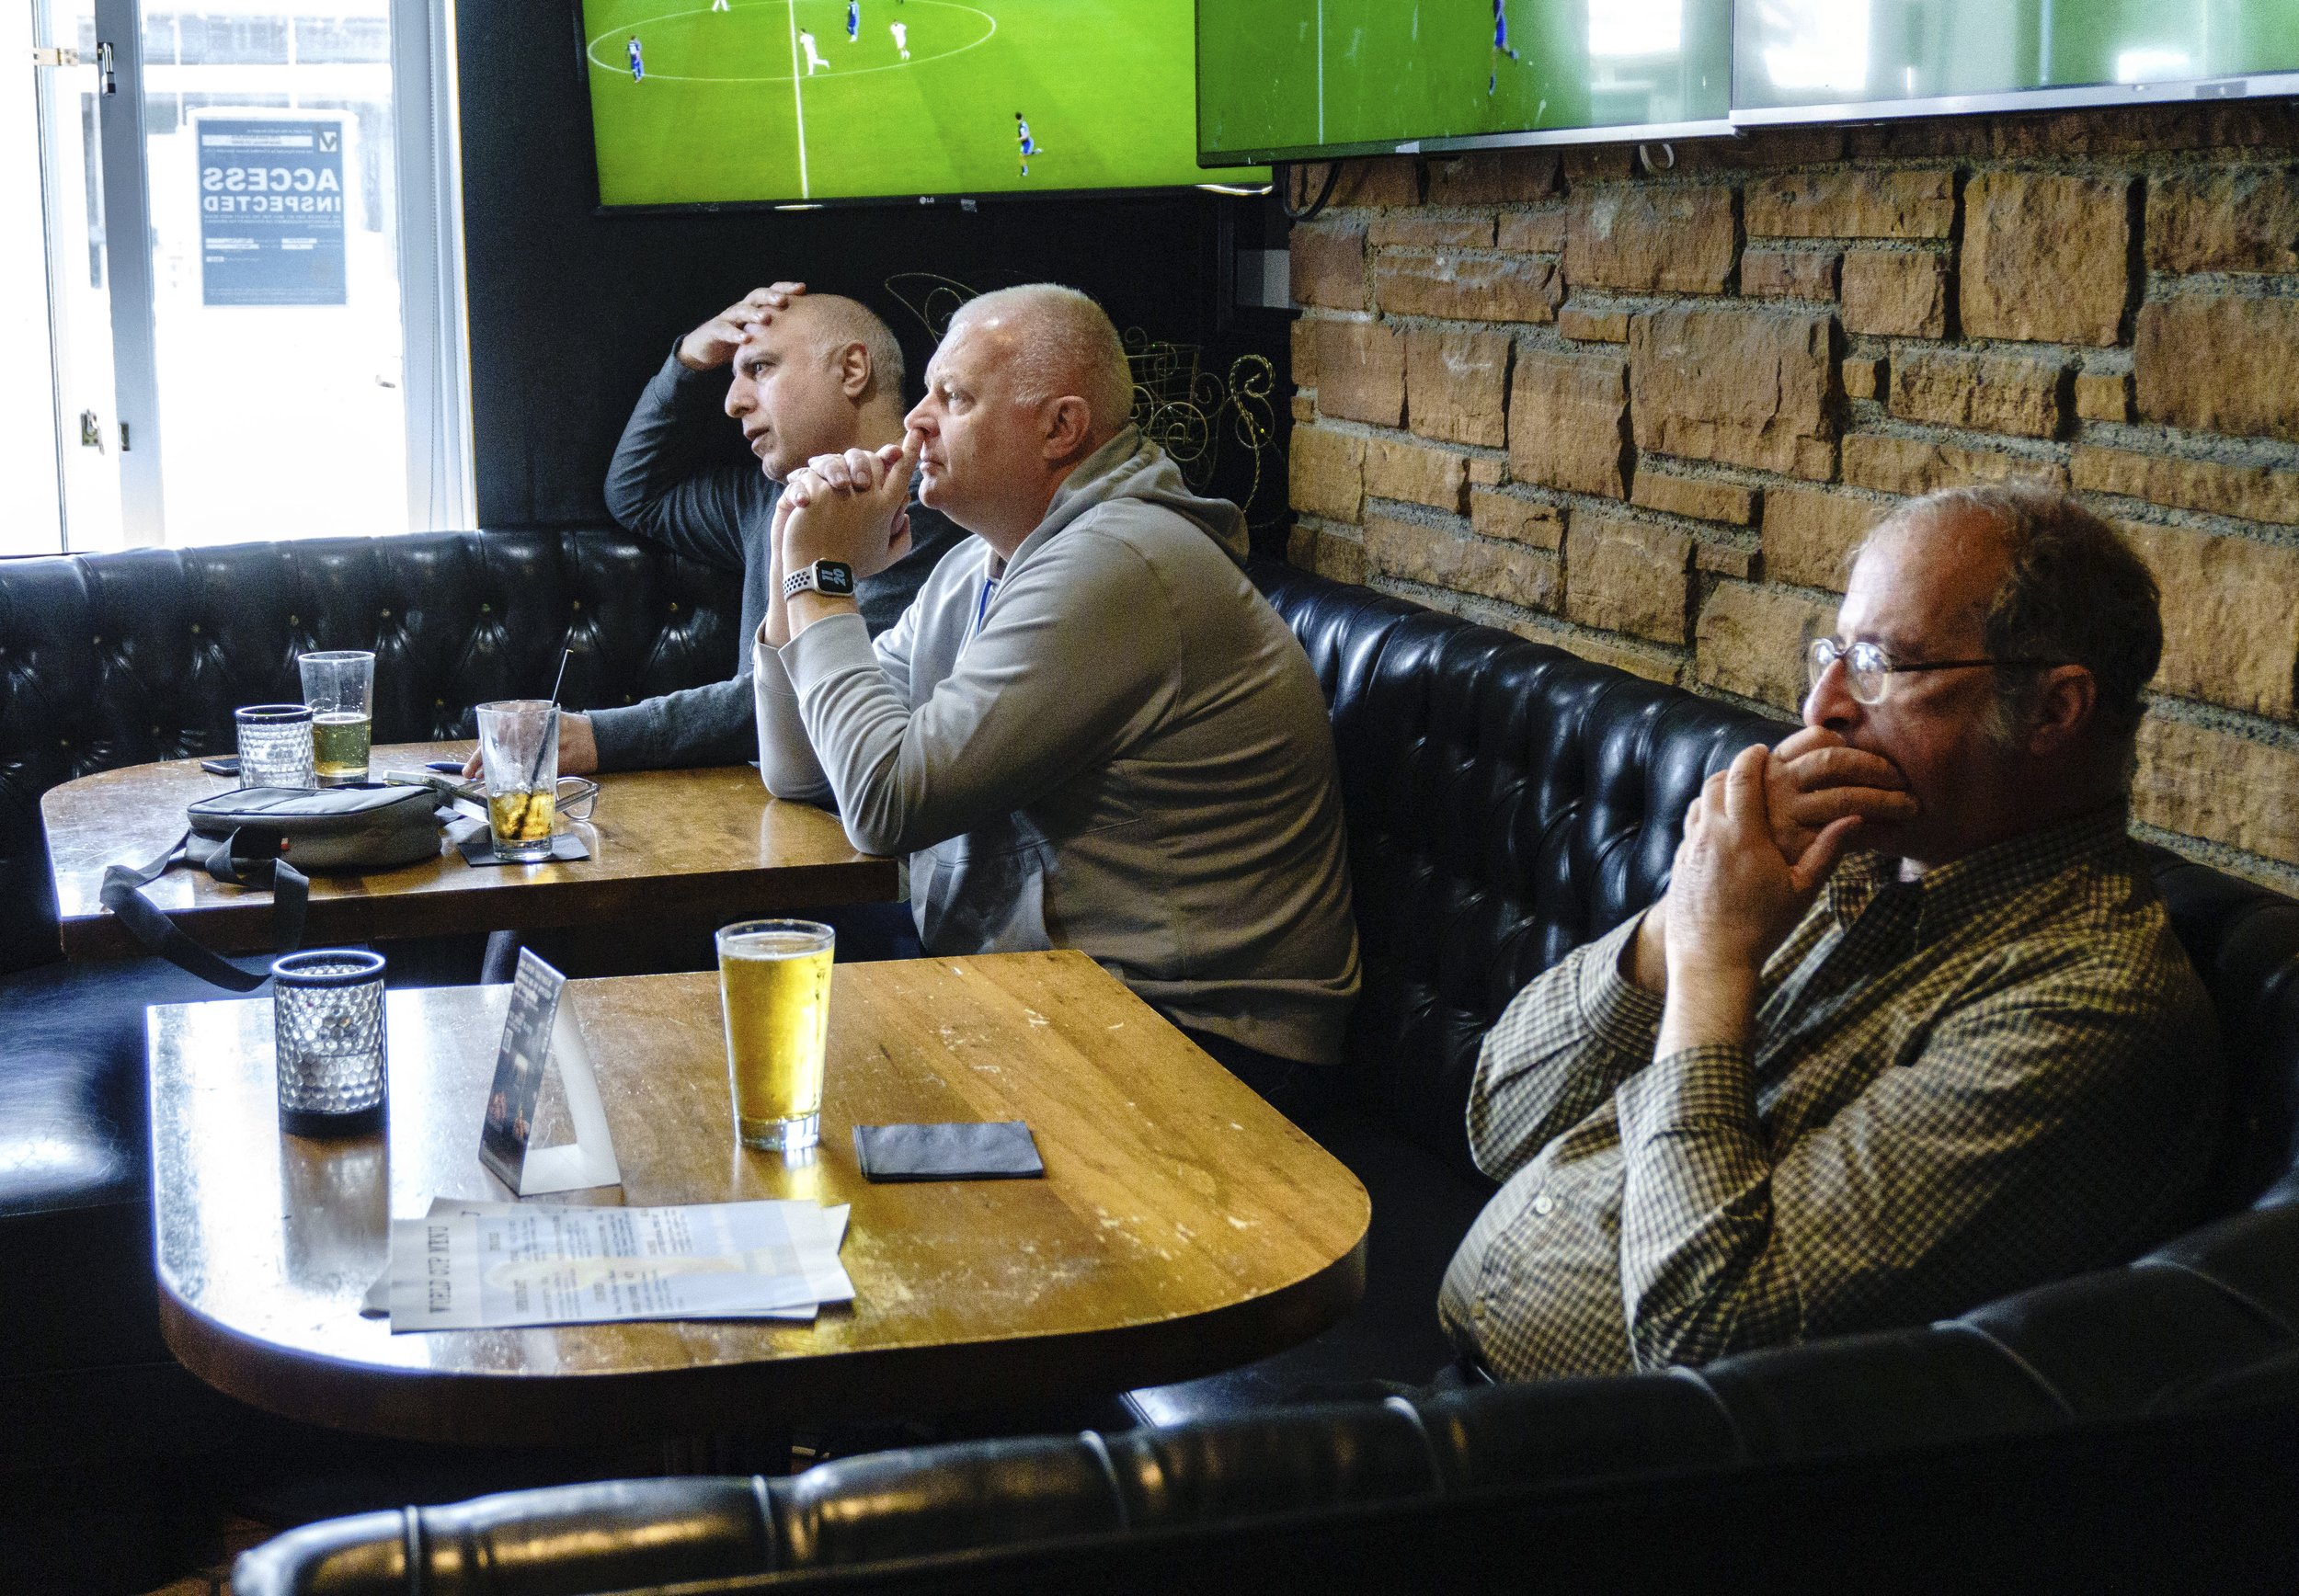  (L-R) David Massey, Stephan Ruers and Dov anticipatedly watch the USA soccer team play Iran in the FIFA World Cup Qatar 2022 at Busby's West sports bar and restaurant in Santa Monica. Massey is oringinally from England but is supporting the USA team